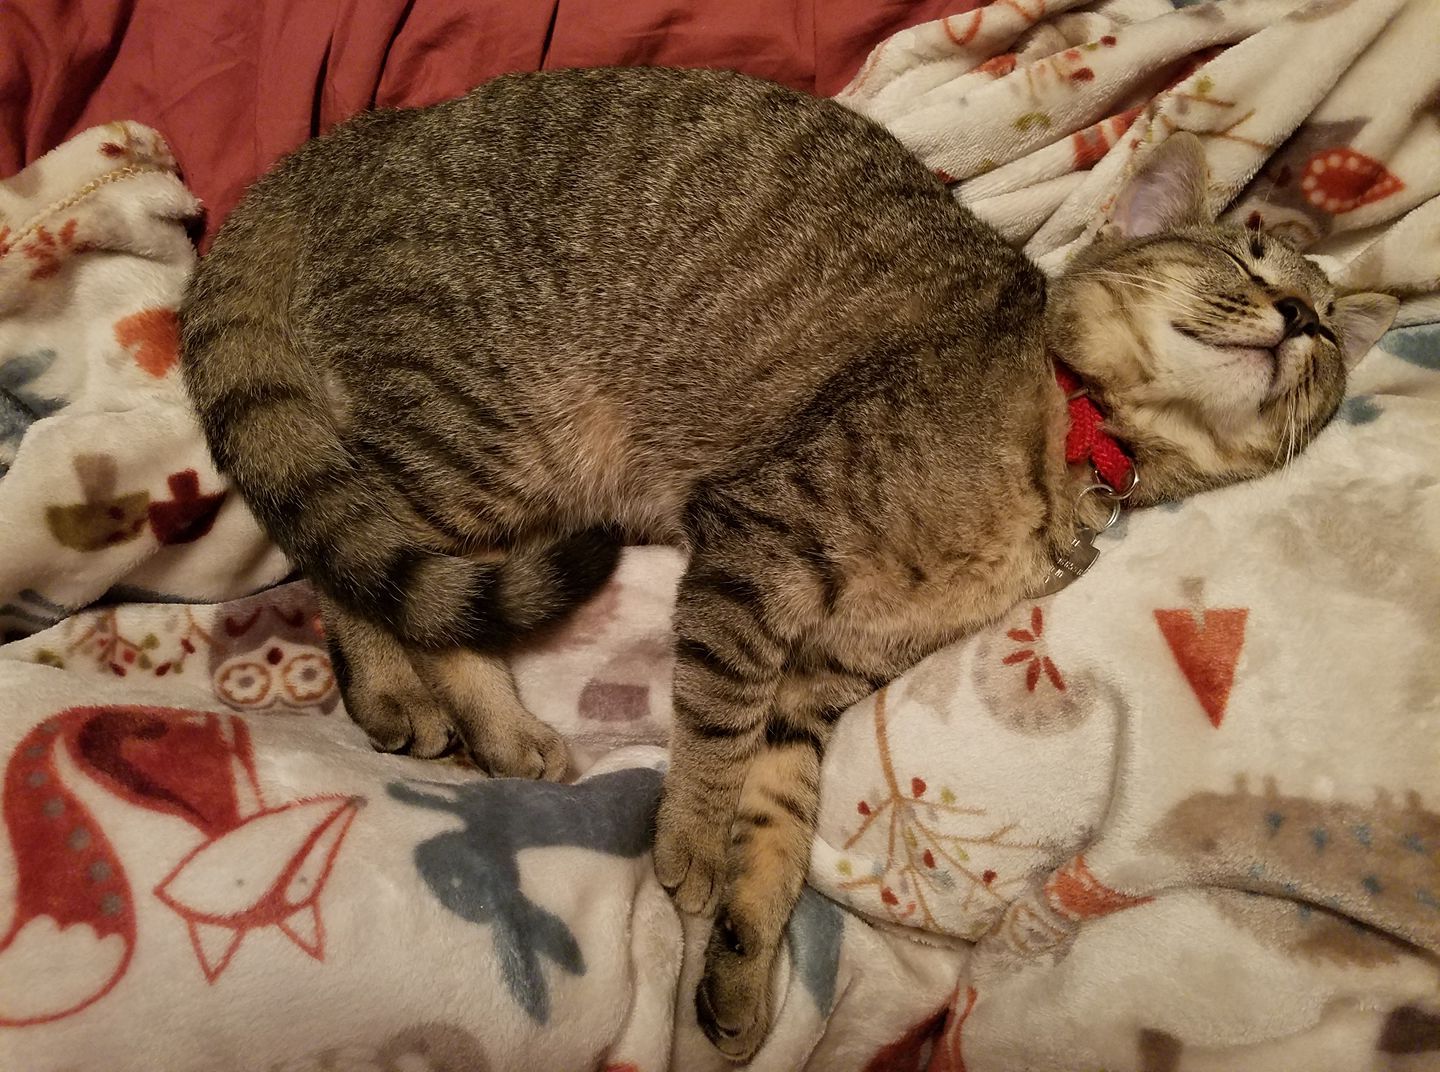 Pigeon the tabby kitten naps on the bed